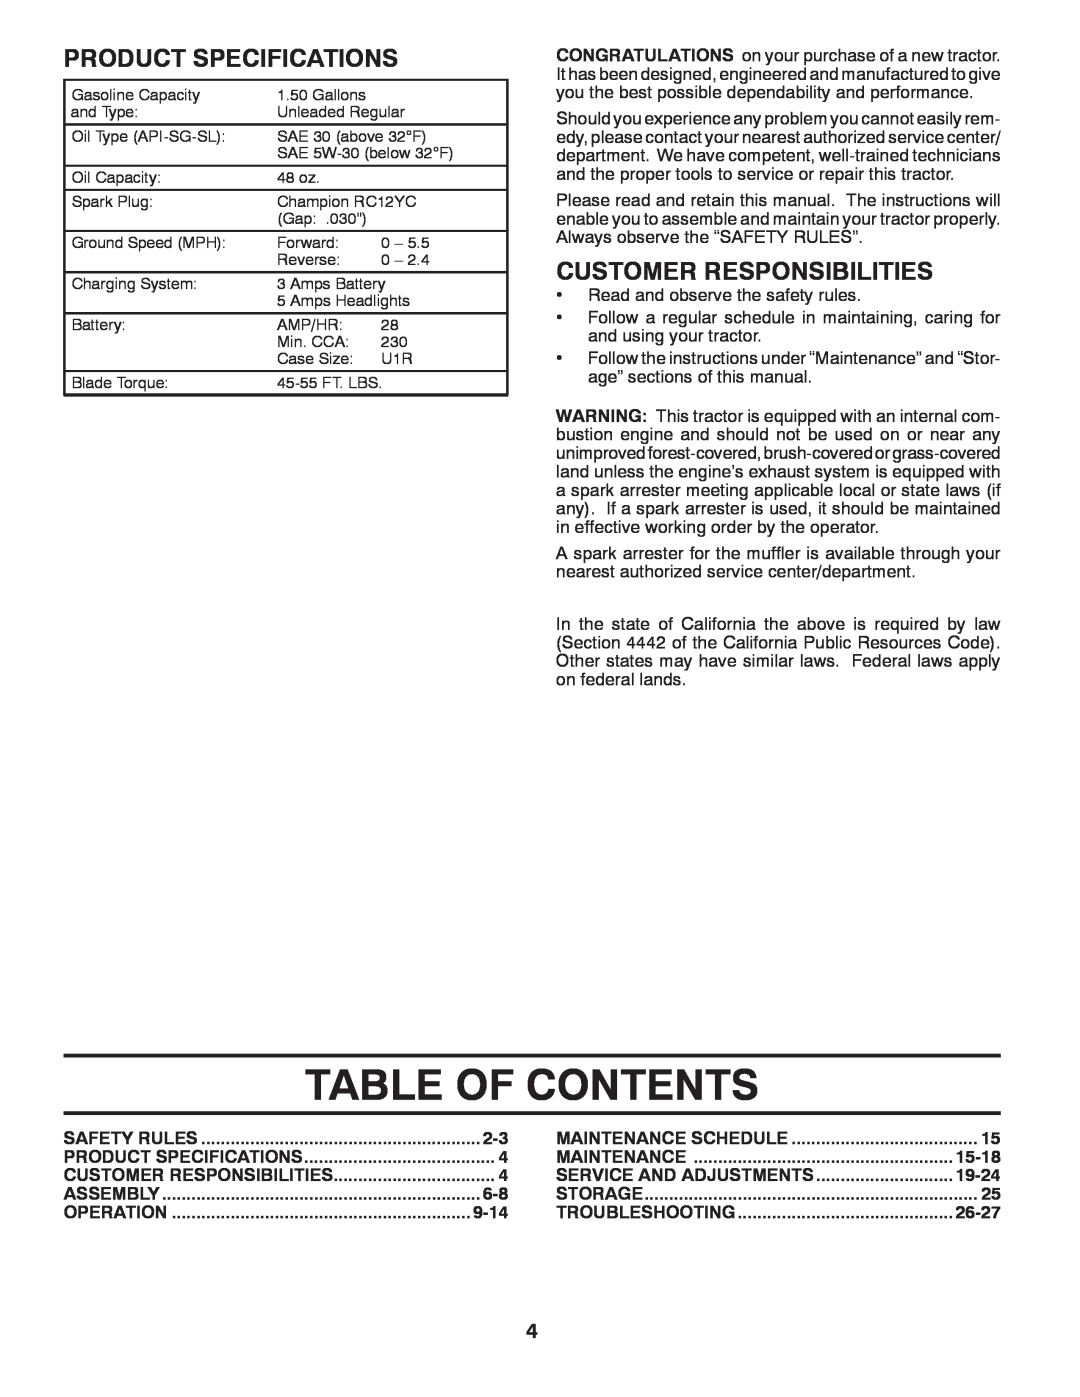 McCulloch M19542H manual Table Of Contents, Product Specifications, Customer Responsibilities, 9-14, 15-18, 19-24, 26-27 